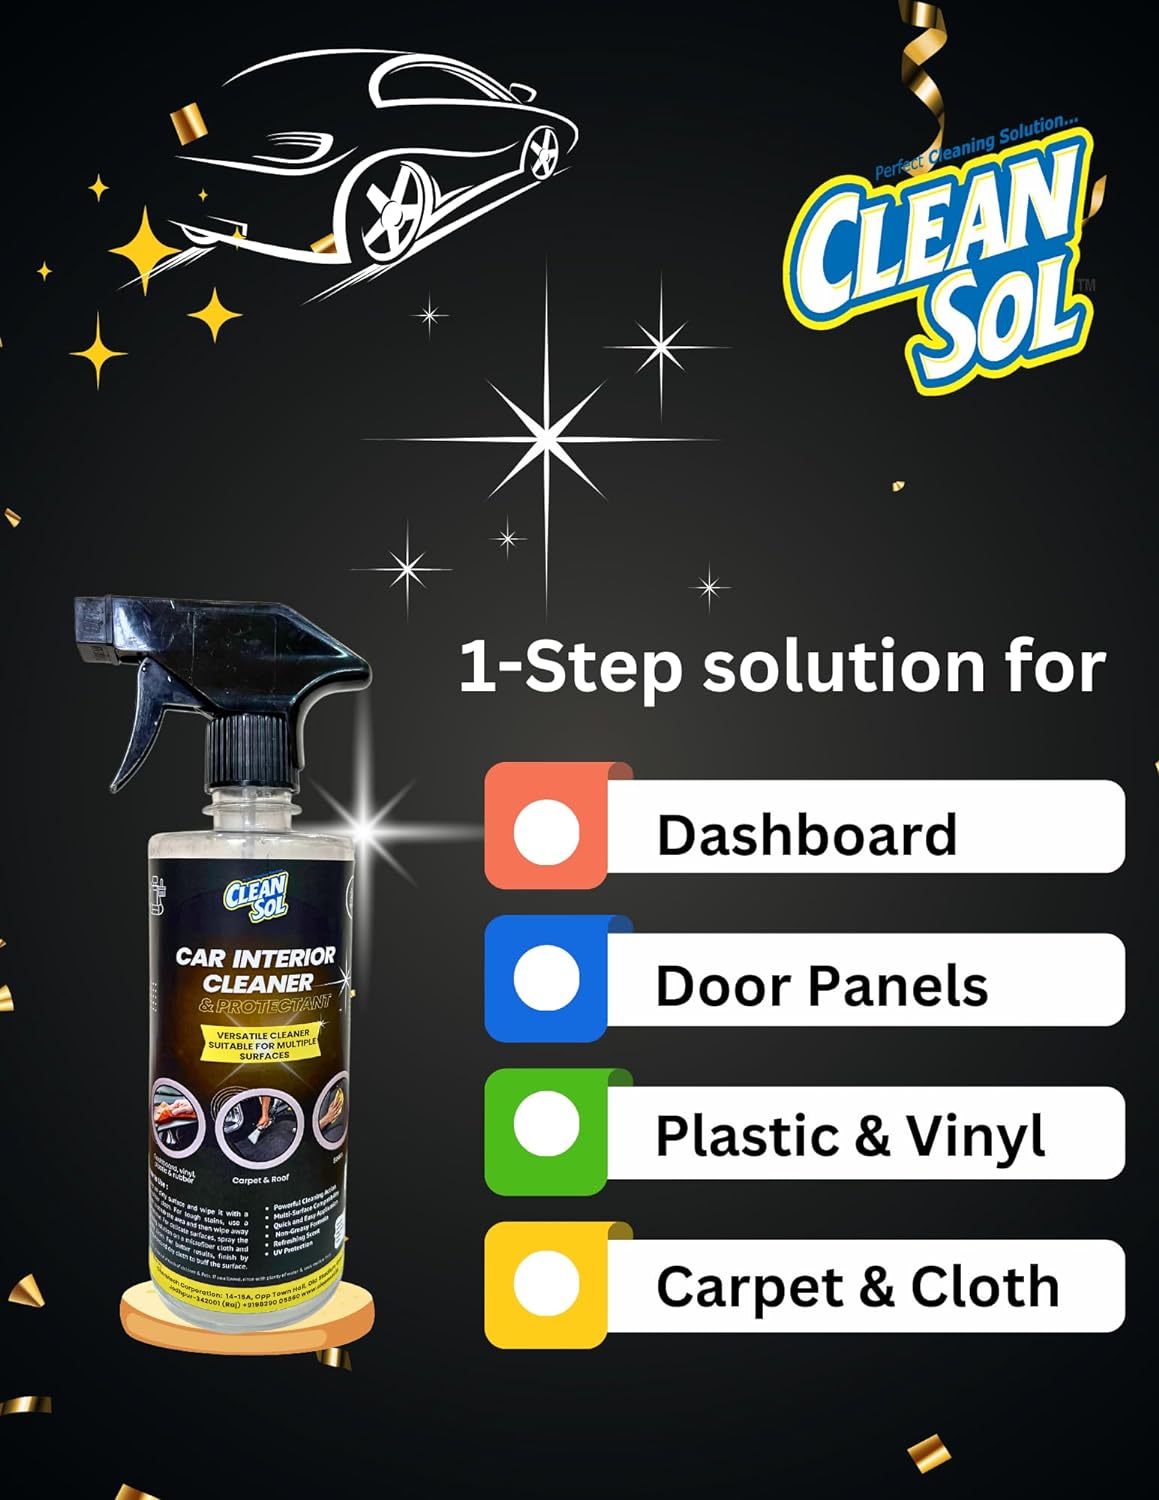 Cleansol Car Interior Cleaner and Protectant Spray- 400ML| for Dashboard, Car Seats, Door Panels and Roof | Fresh Lemon Fragrance